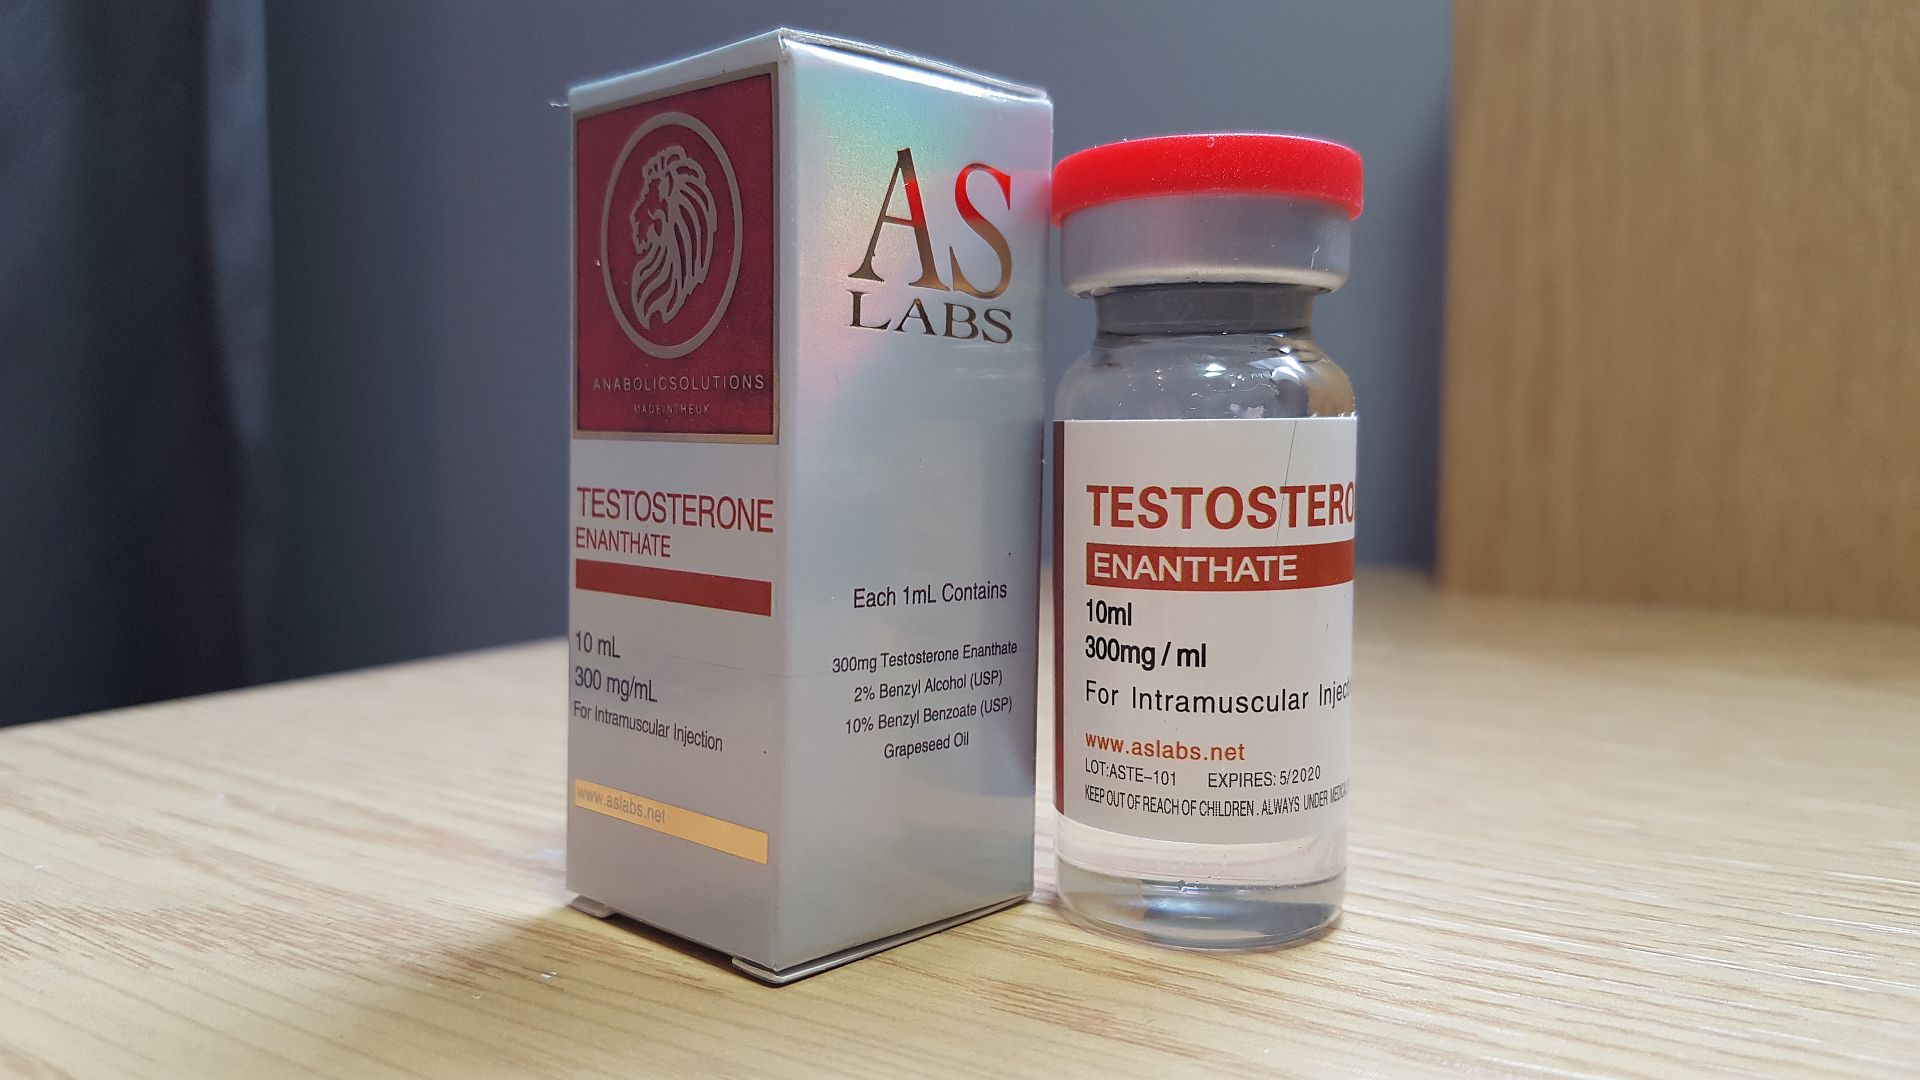 SIMEC lab test results revealed that AS Labs Testosterone Enanthate actuall...